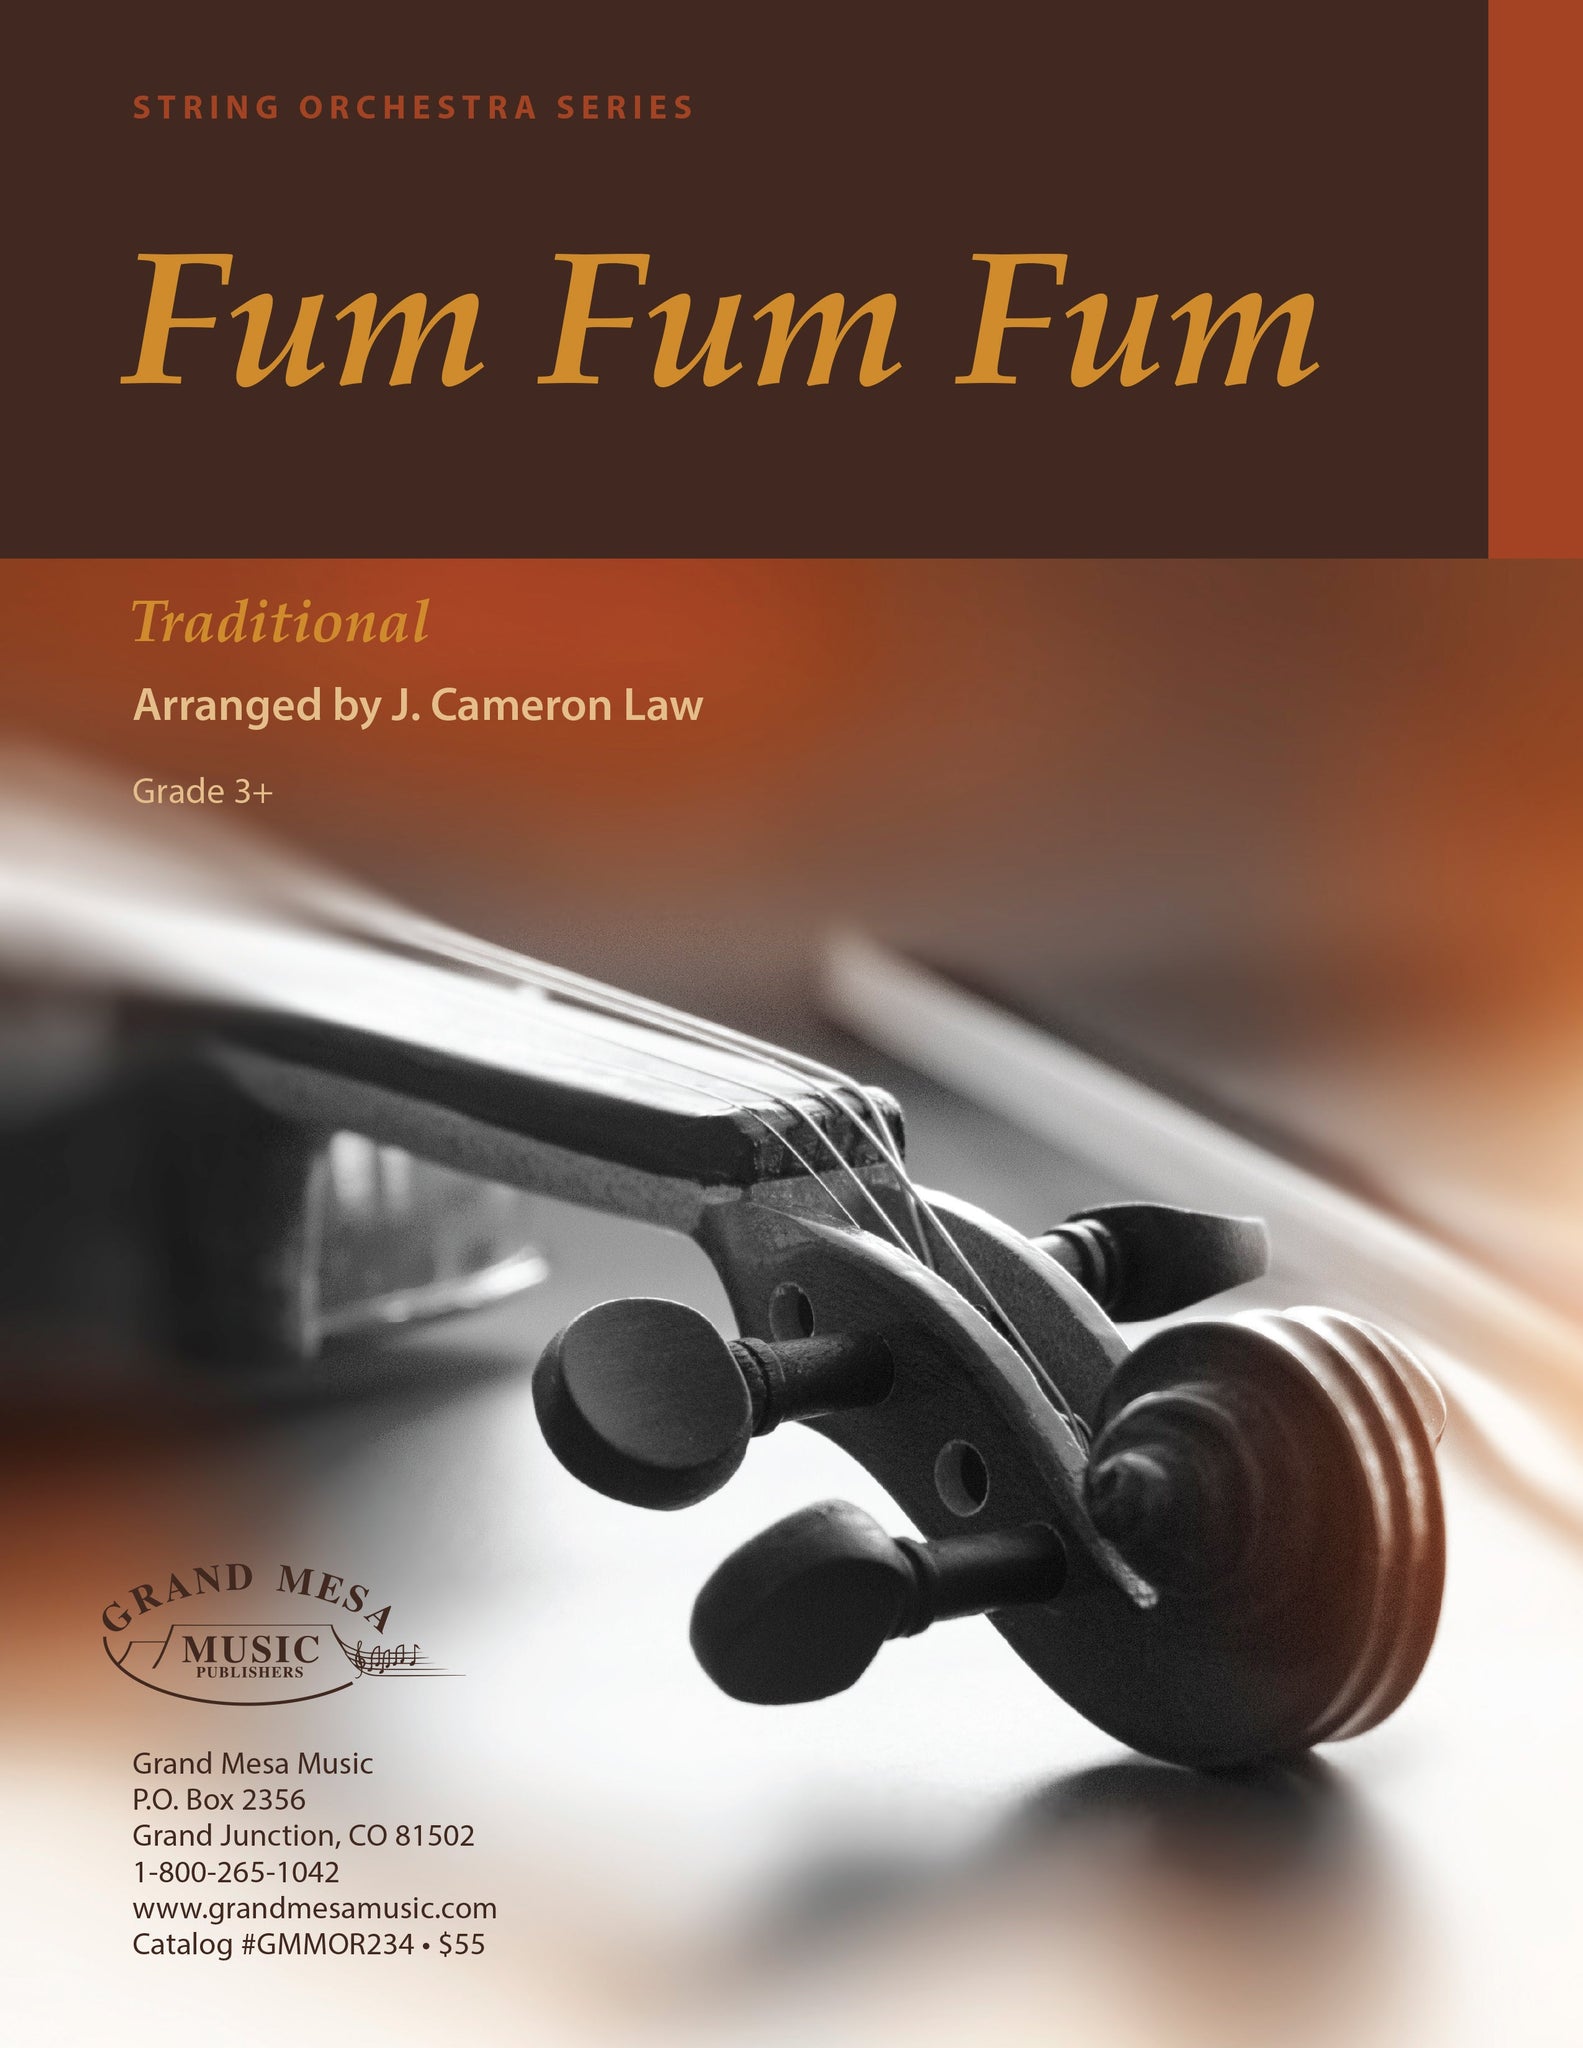 Strings sheet music cover of Fum Fum Fum, arranged by J. Cameron Law.